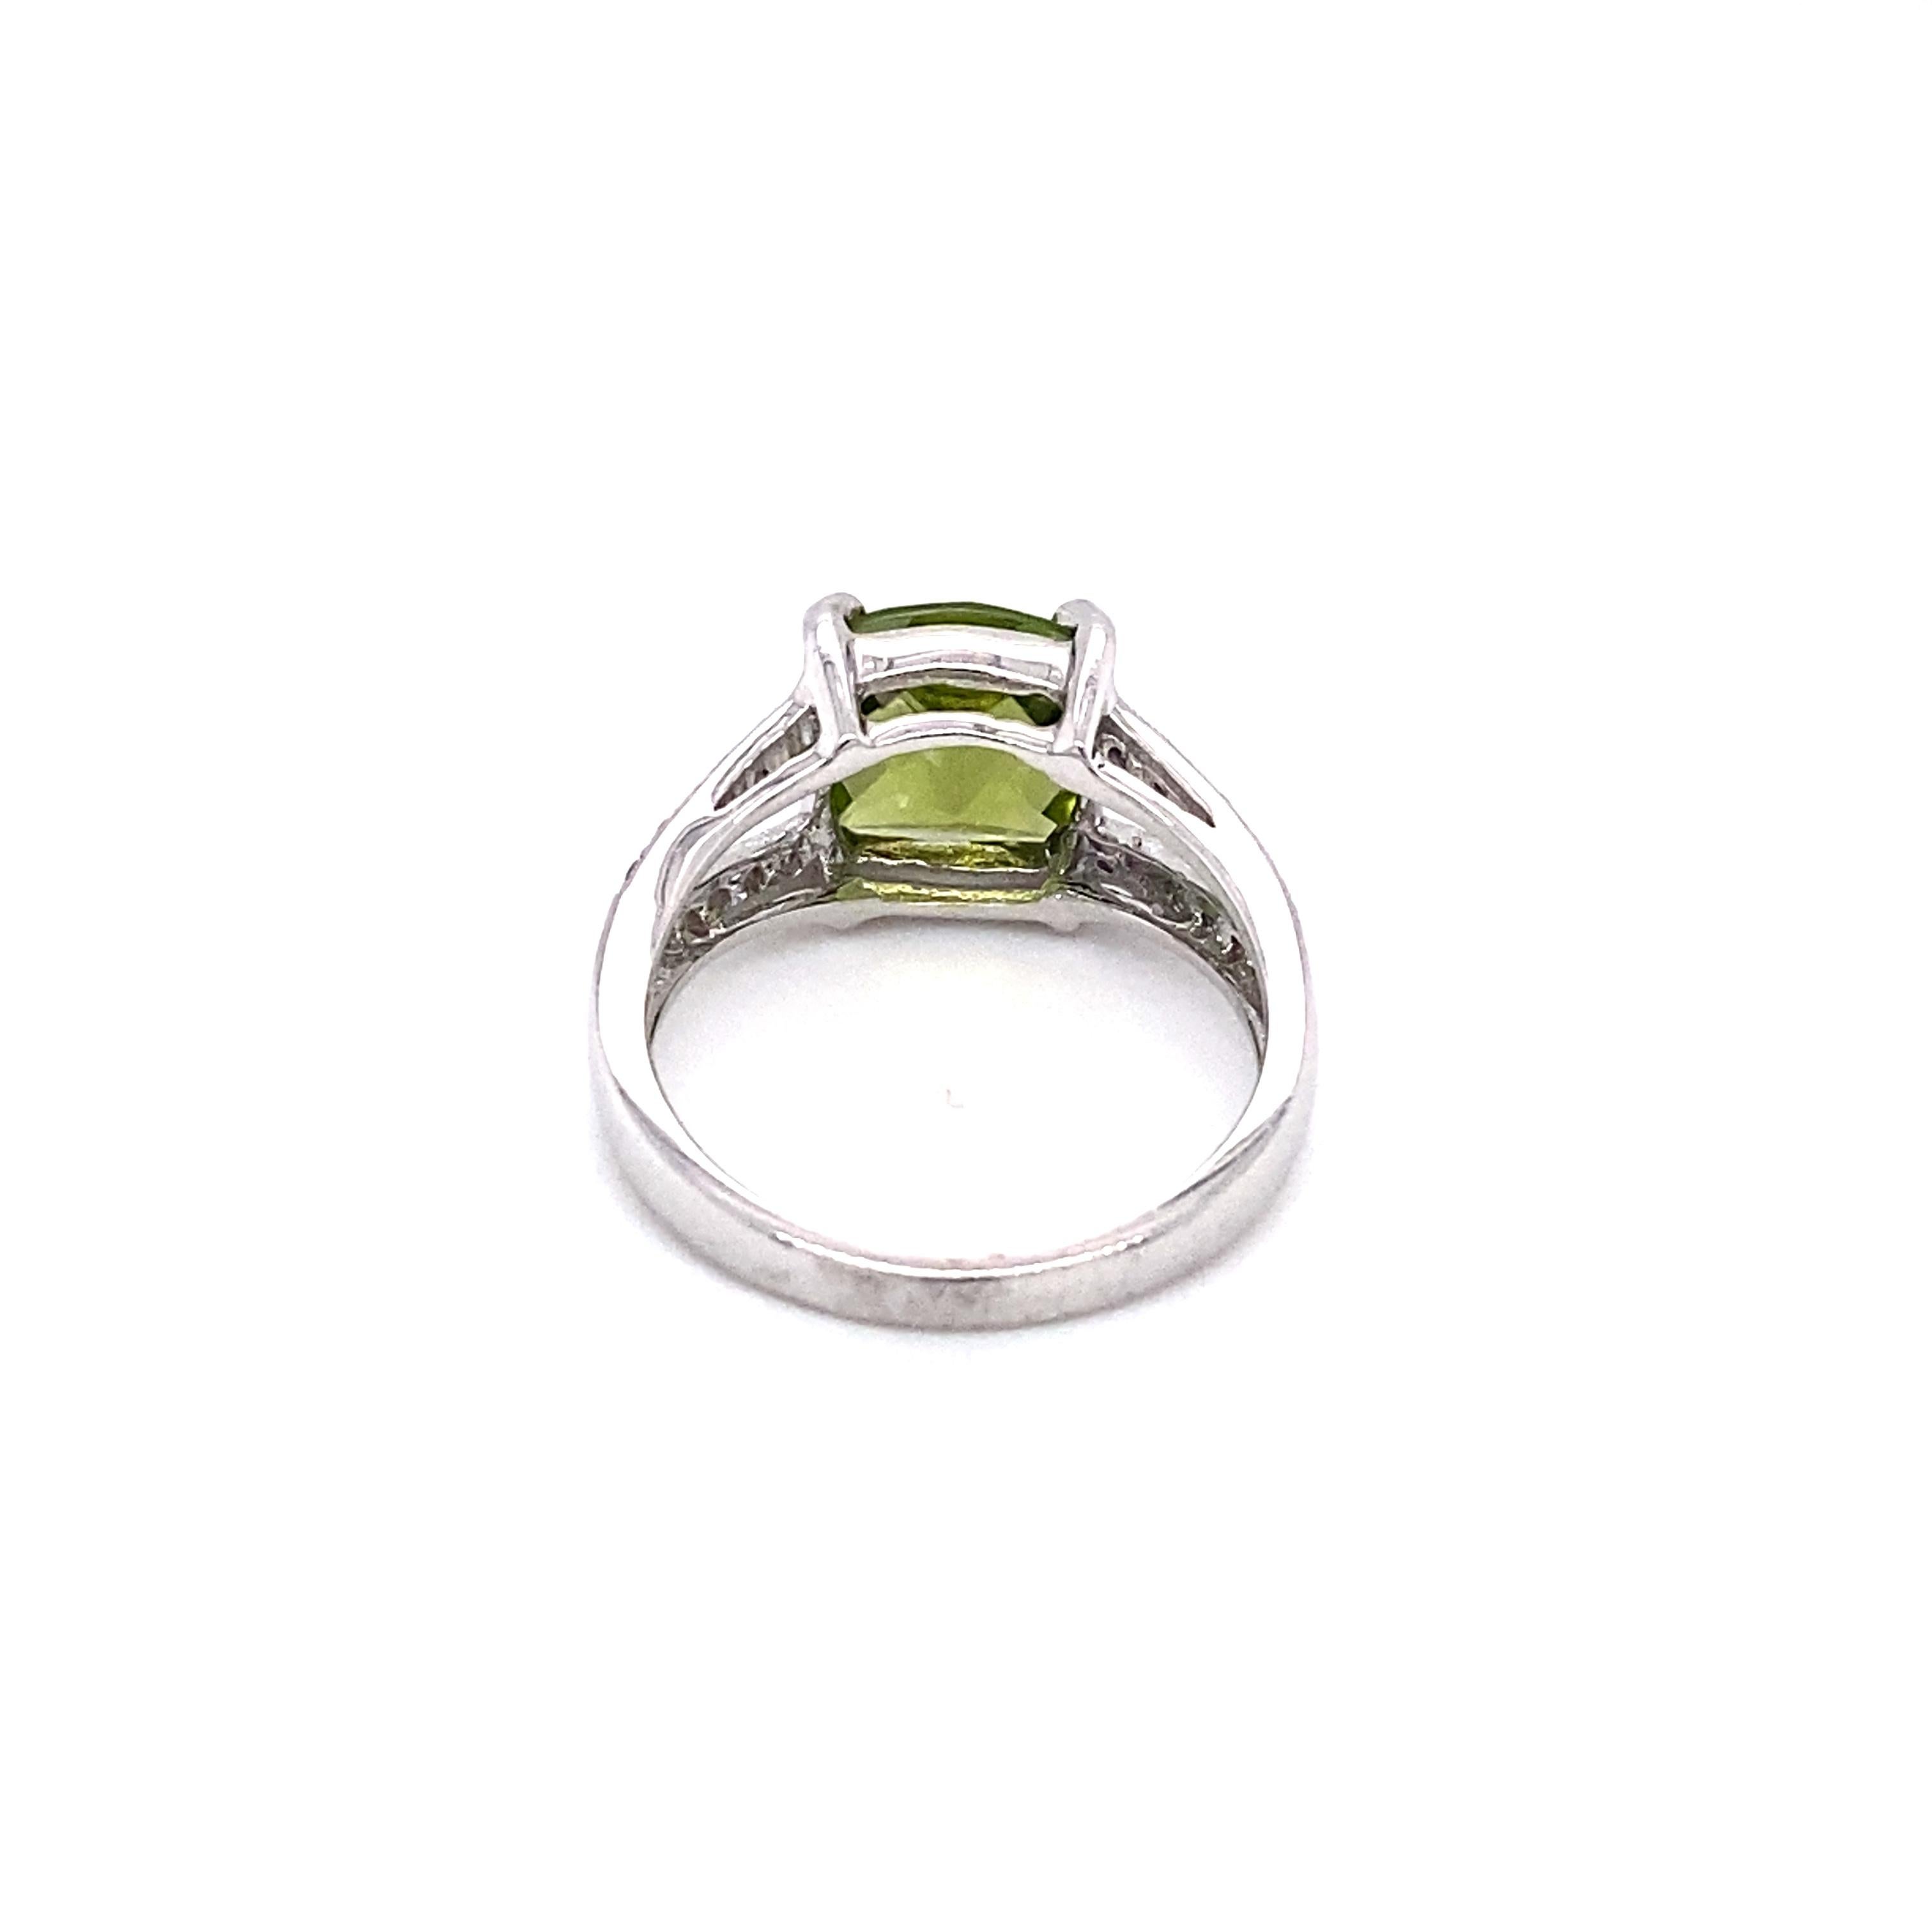 Circa: 1990s
Metal Type: 14K white gold
Weight: 3.9g
Size: US 6, resizable

Diamond Details:

Carat: 0.20 carat total weight
Shape: Round brilliant
Color: G
Clarity: VS

Peridot Details:

Carat: Approximately 2.0 carats
Shape: Checkerboard faceted